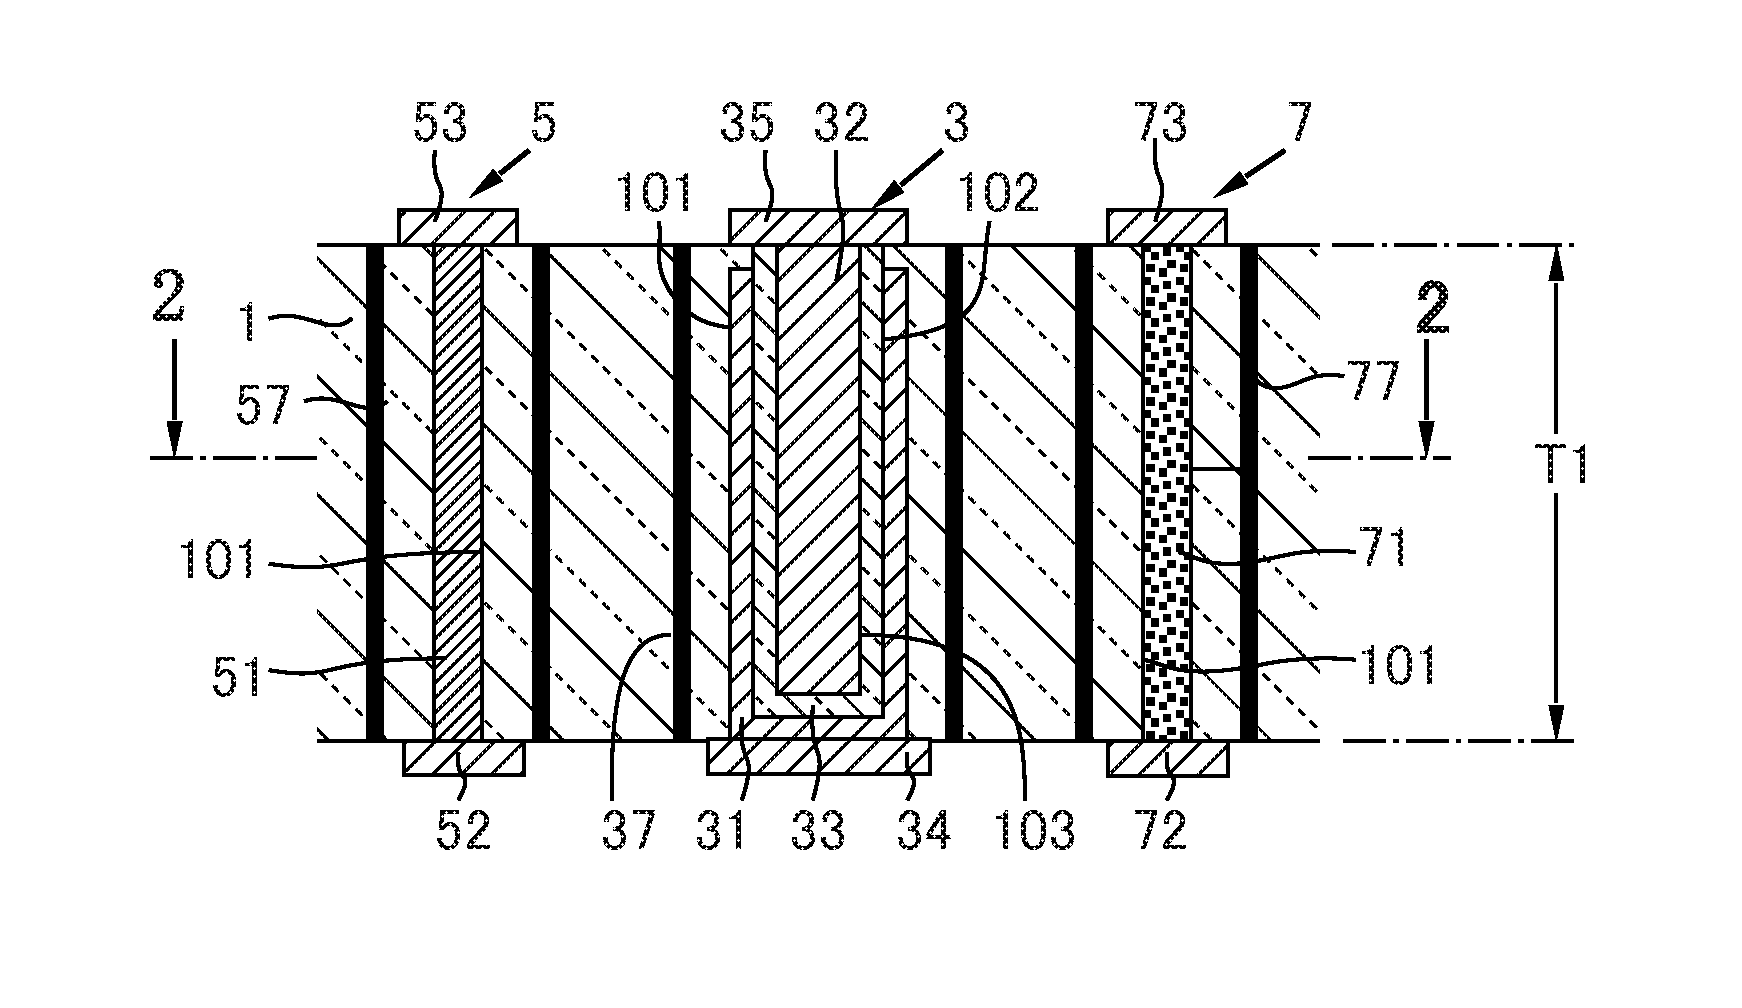 Substrate with built-in passive element